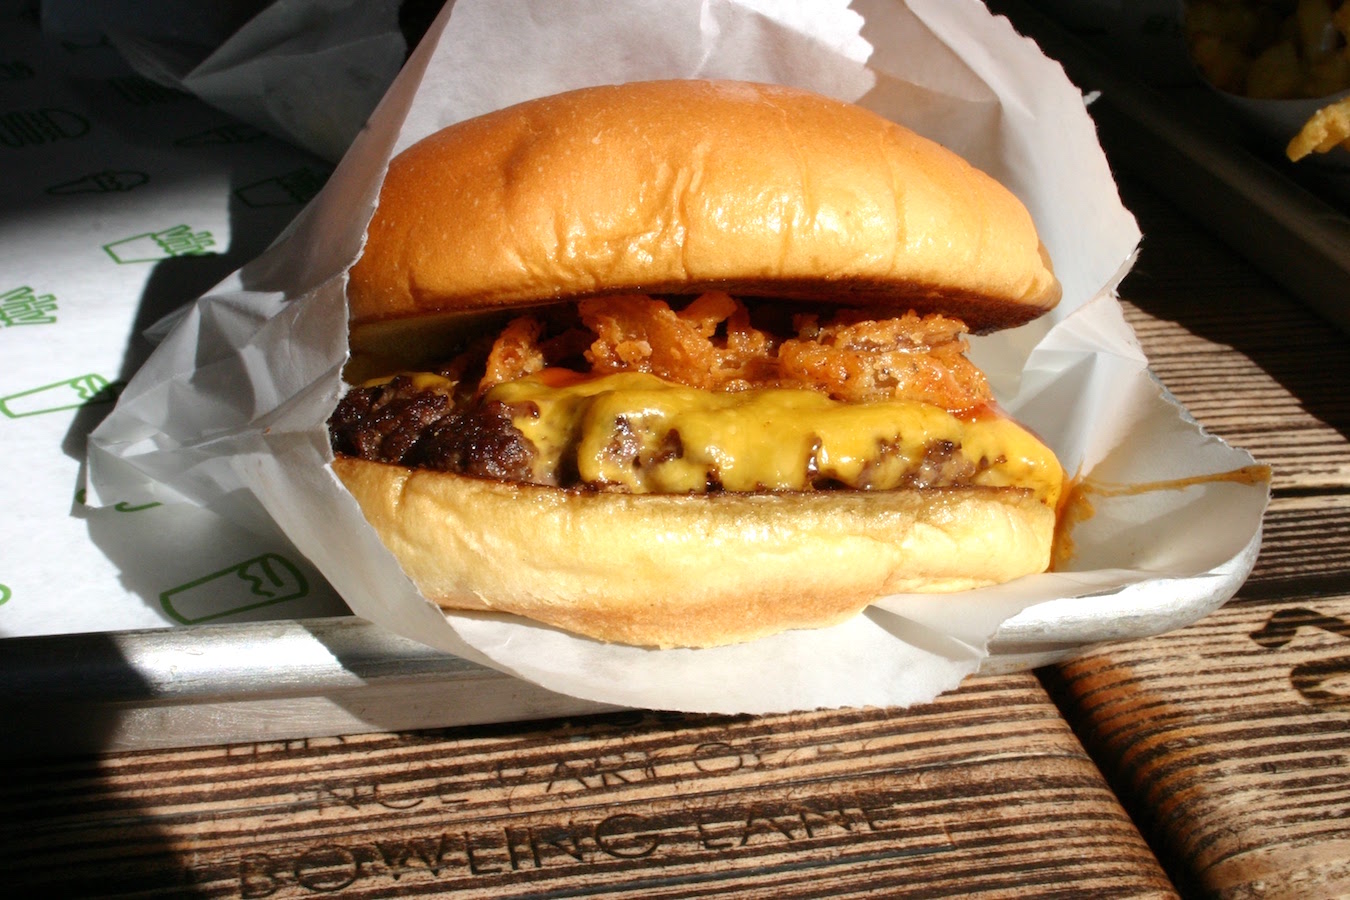 The BBQ ShackMeister Burger at Shake Shack is one of the menu items featured for a limited time.